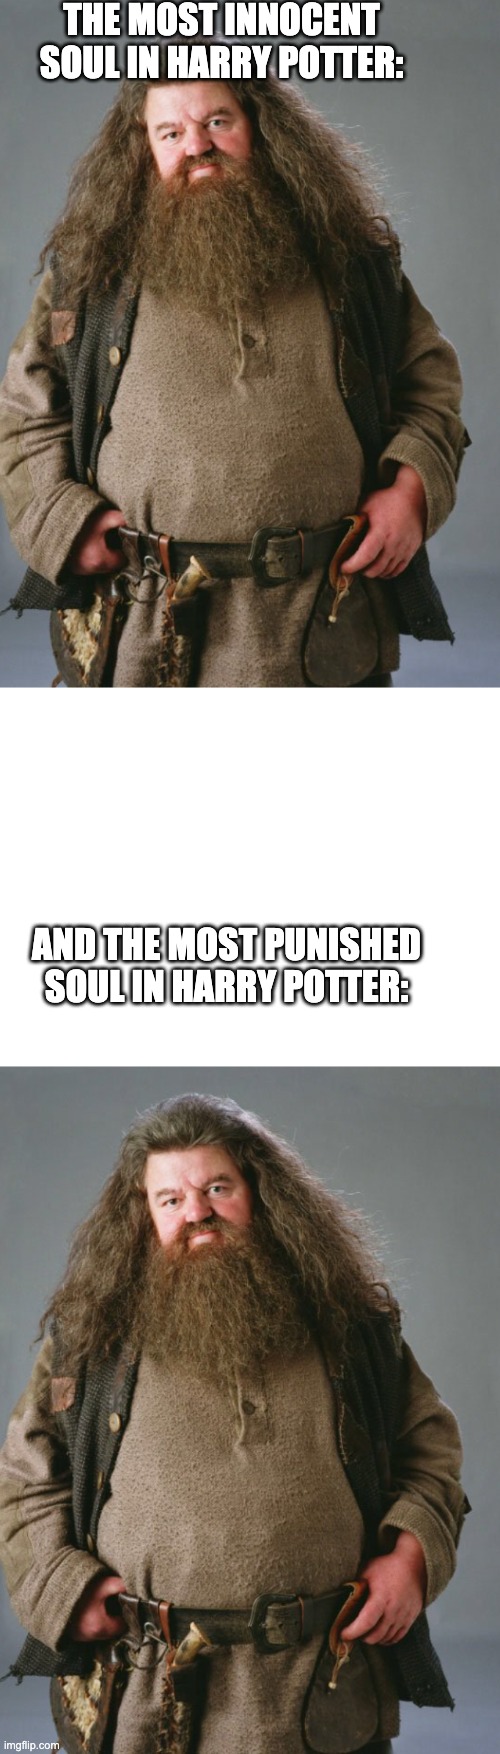 Do you dare to disagree?! | THE MOST INNOCENT SOUL IN HARRY POTTER:; AND THE MOST PUNISHED SOUL IN HARRY POTTER: | image tagged in hagrid,harry potter,furrfluf,meme,handmade,real | made w/ Imgflip meme maker